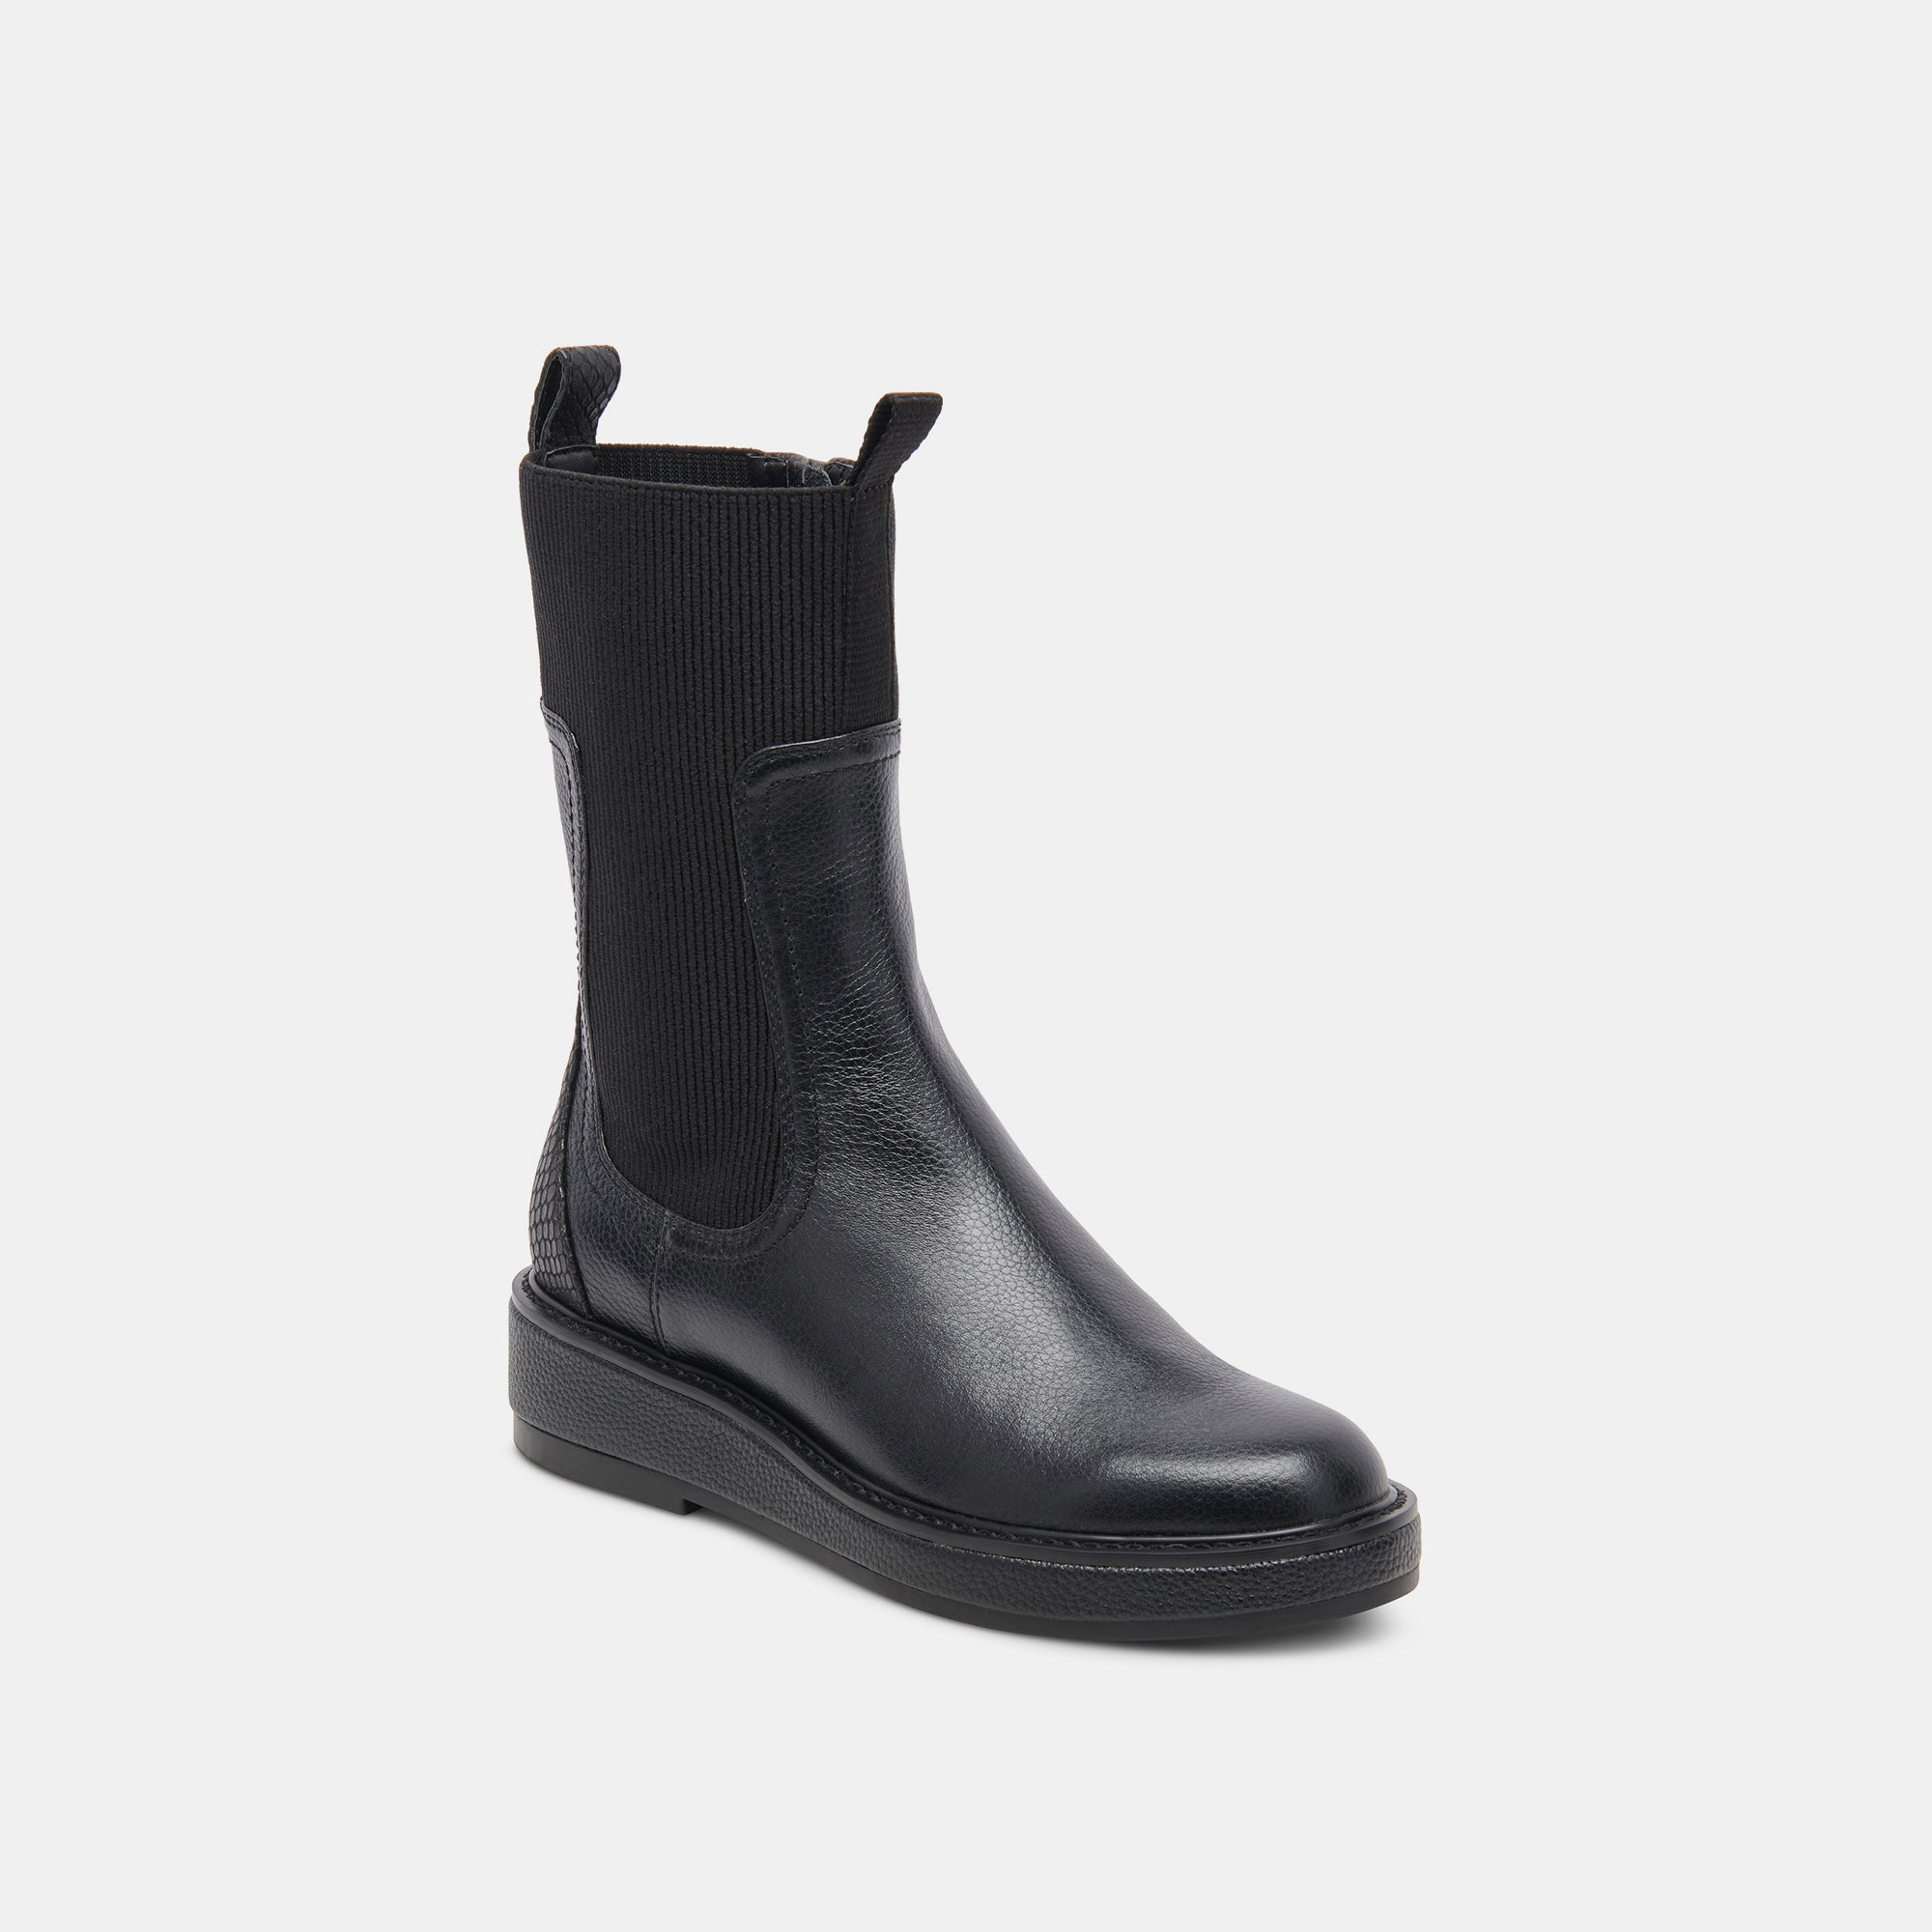 Elyse H2O Boots Black Leather | Waterproof Black Leather Boots – Dolce Vita